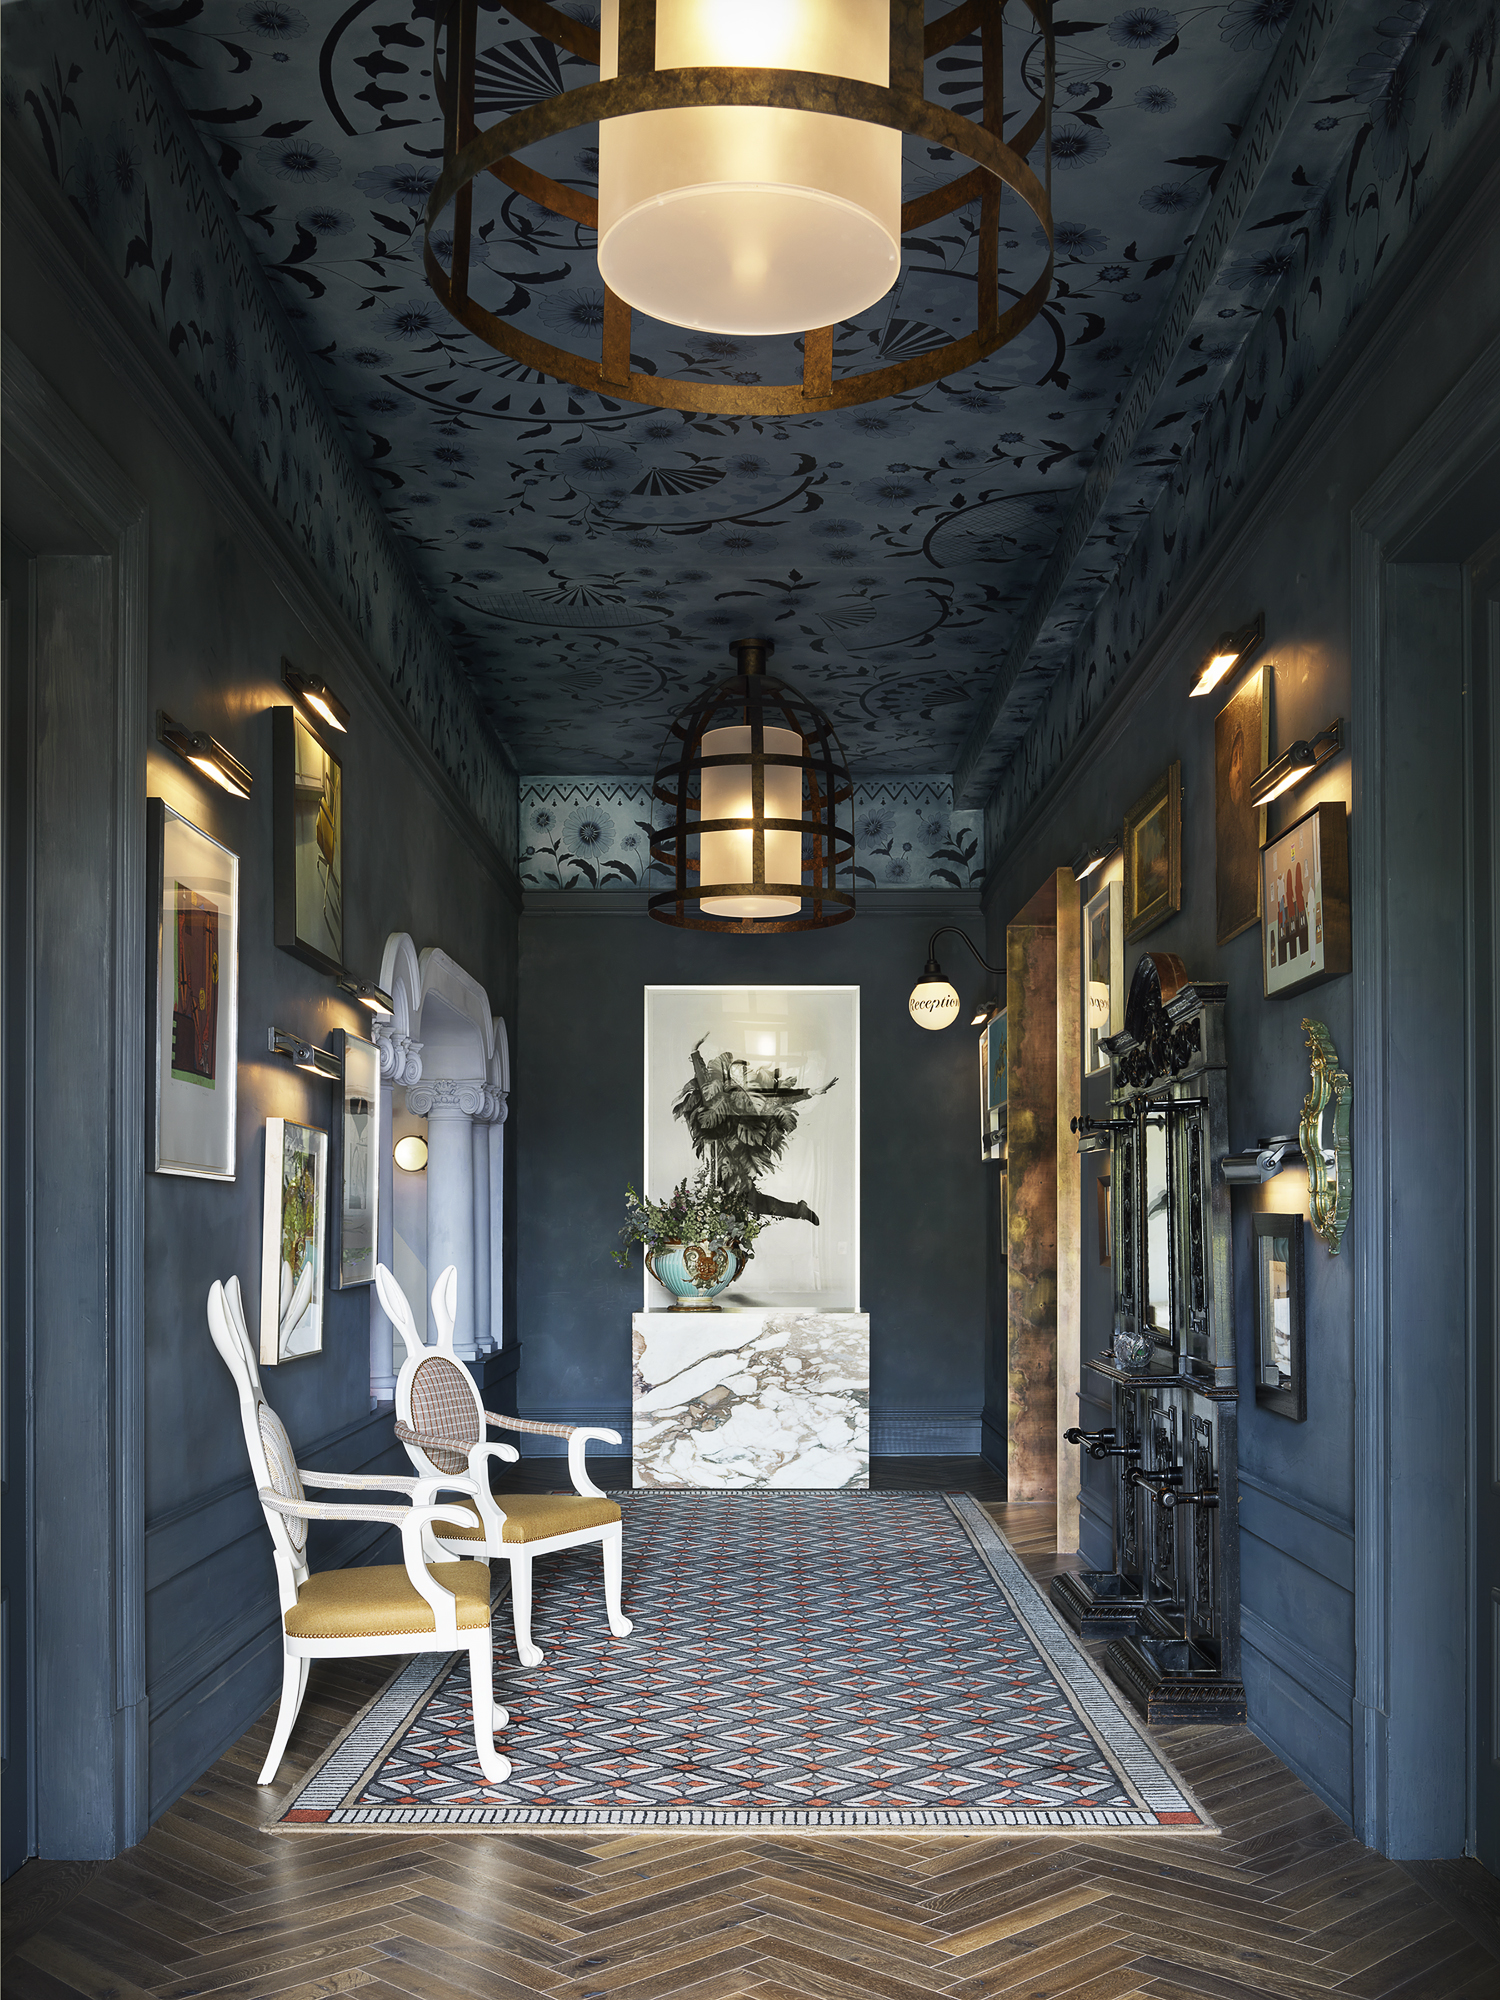 The dramatic entry features an artist-crafted ceiling and rug. (Matthew Millmann)